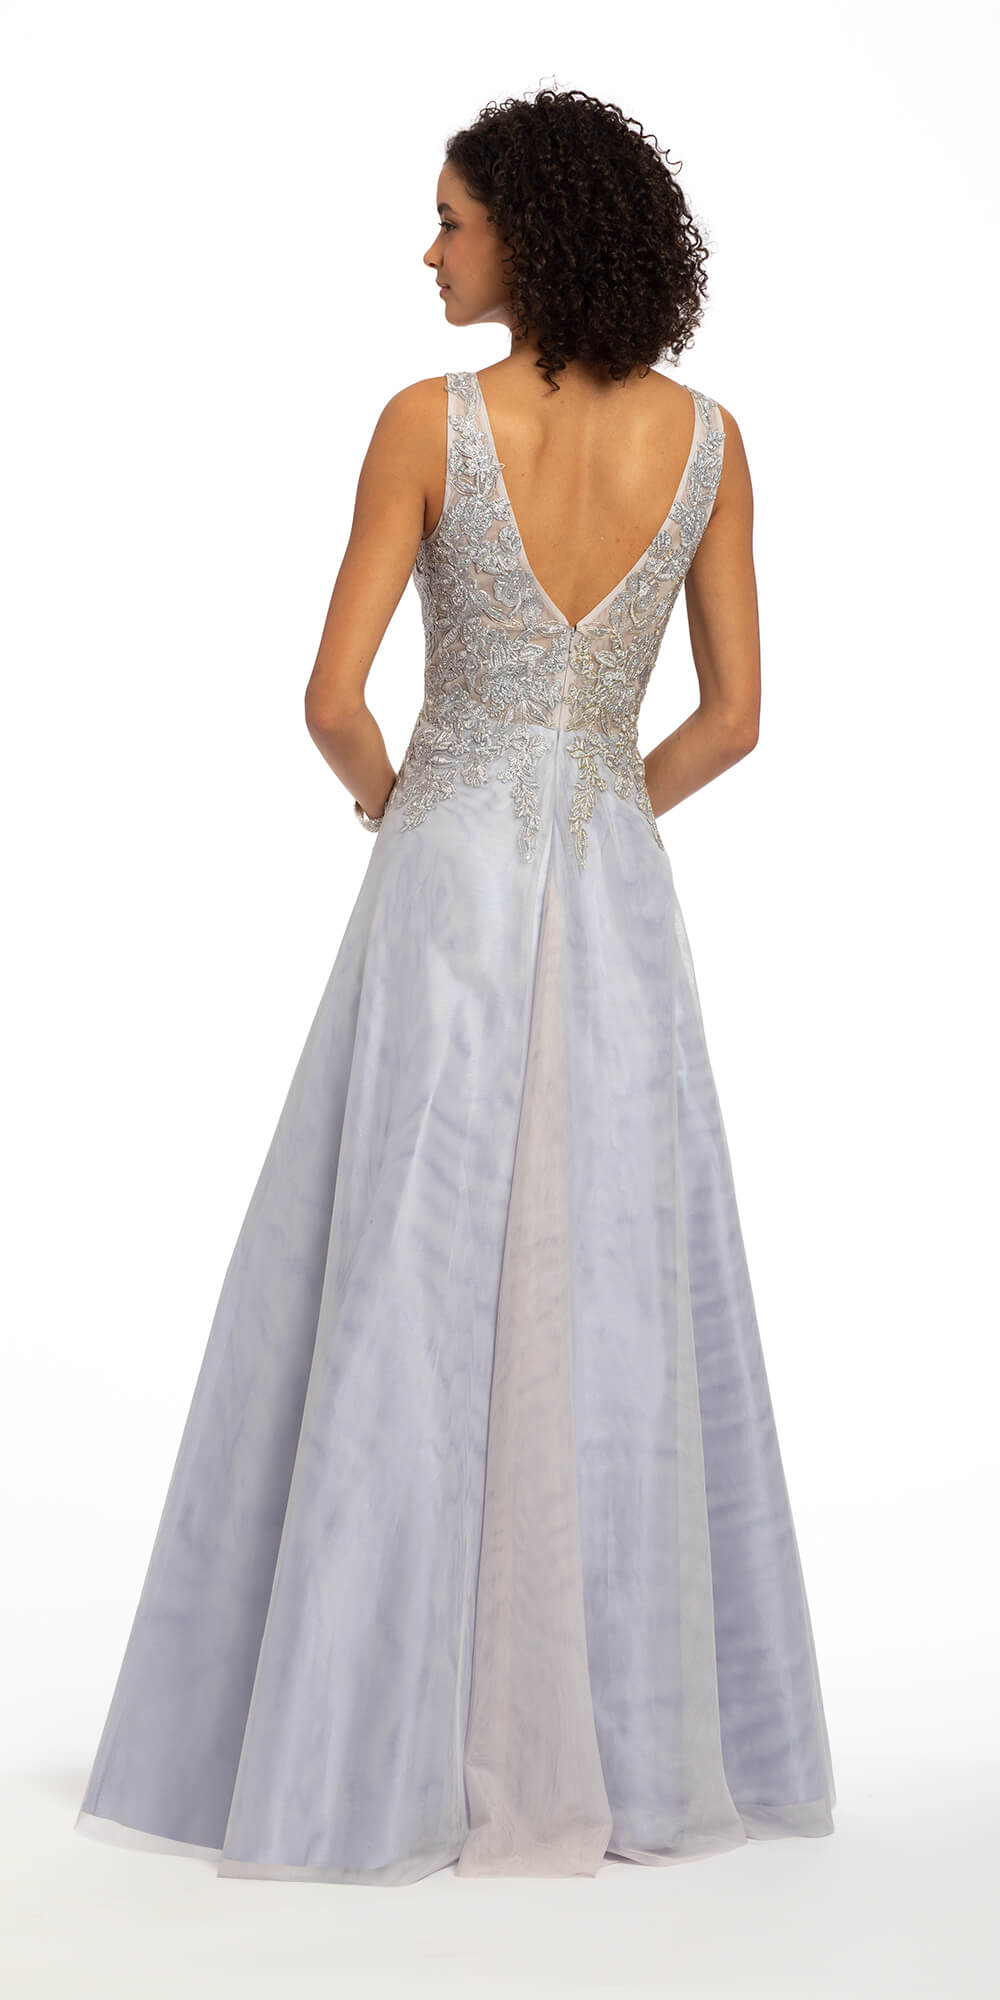 Camille La Vie Plunging Embroidered Sleeveless Two Tone Ballgown